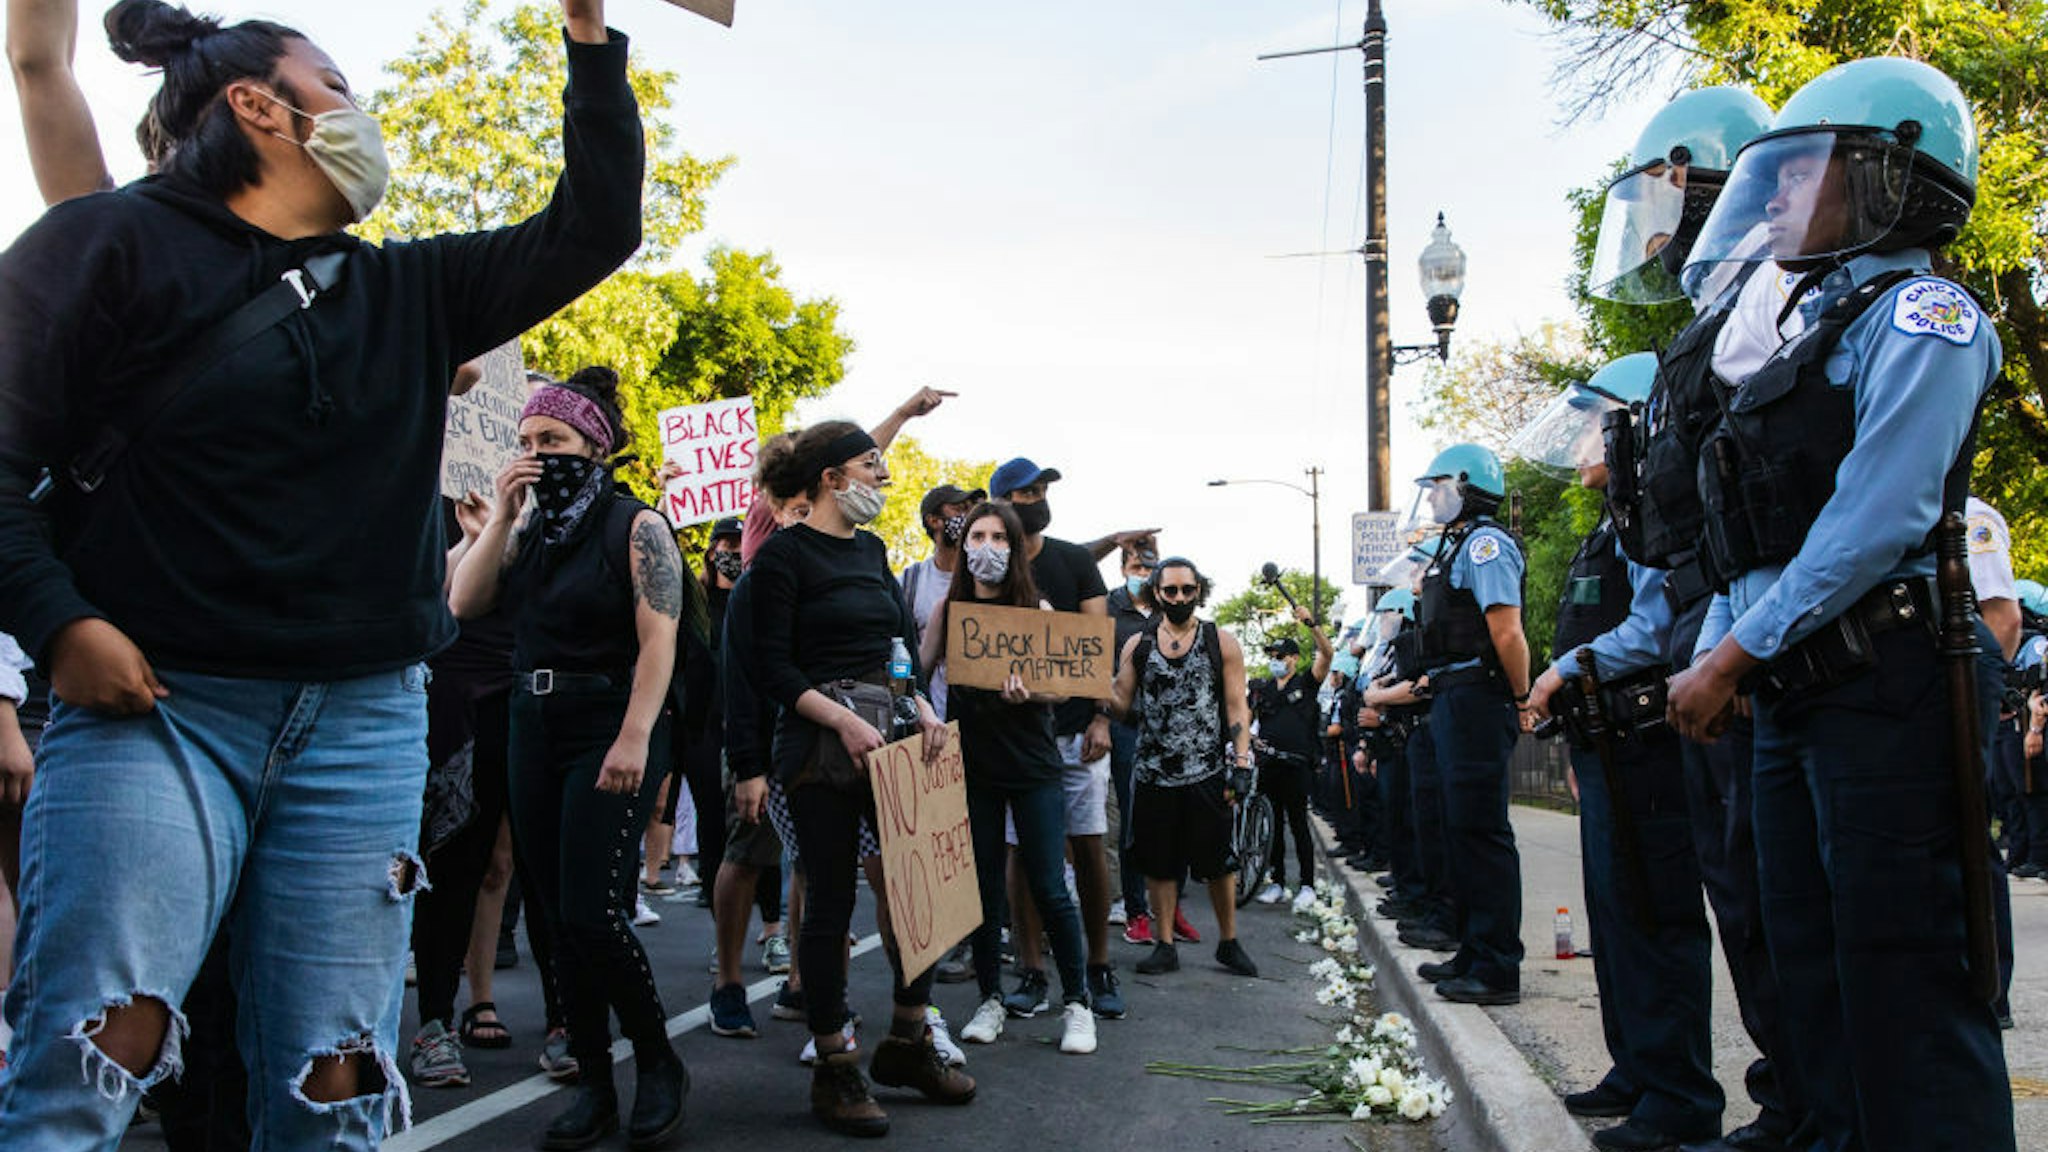 Protesters chant and wave signs at the CPD during a protest on June 06, 2020 in Chicago, Illinois. This is the 12th day of protests since George Floyd died in Minneapolis police custody on May 25. (Photo by Natasha Moustache/Getty Images)